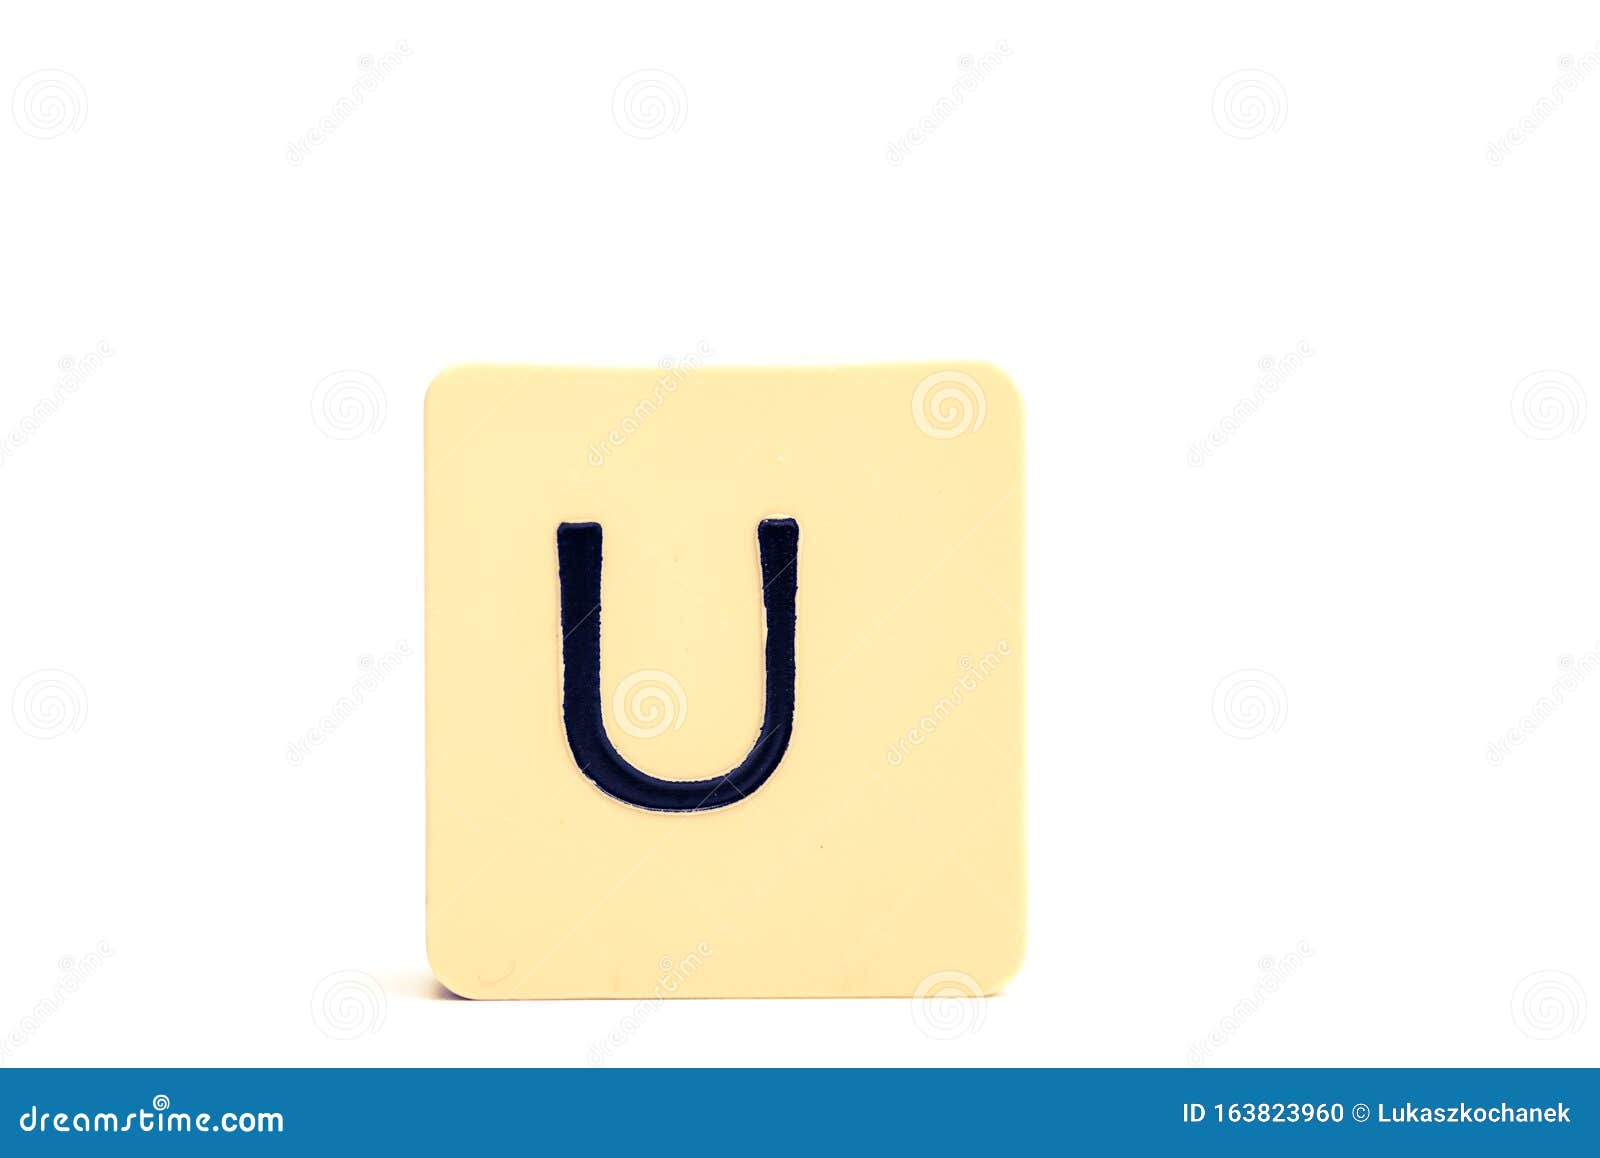 Dark Letter  U  On A Pale Yellow Square  Block Isolated On 